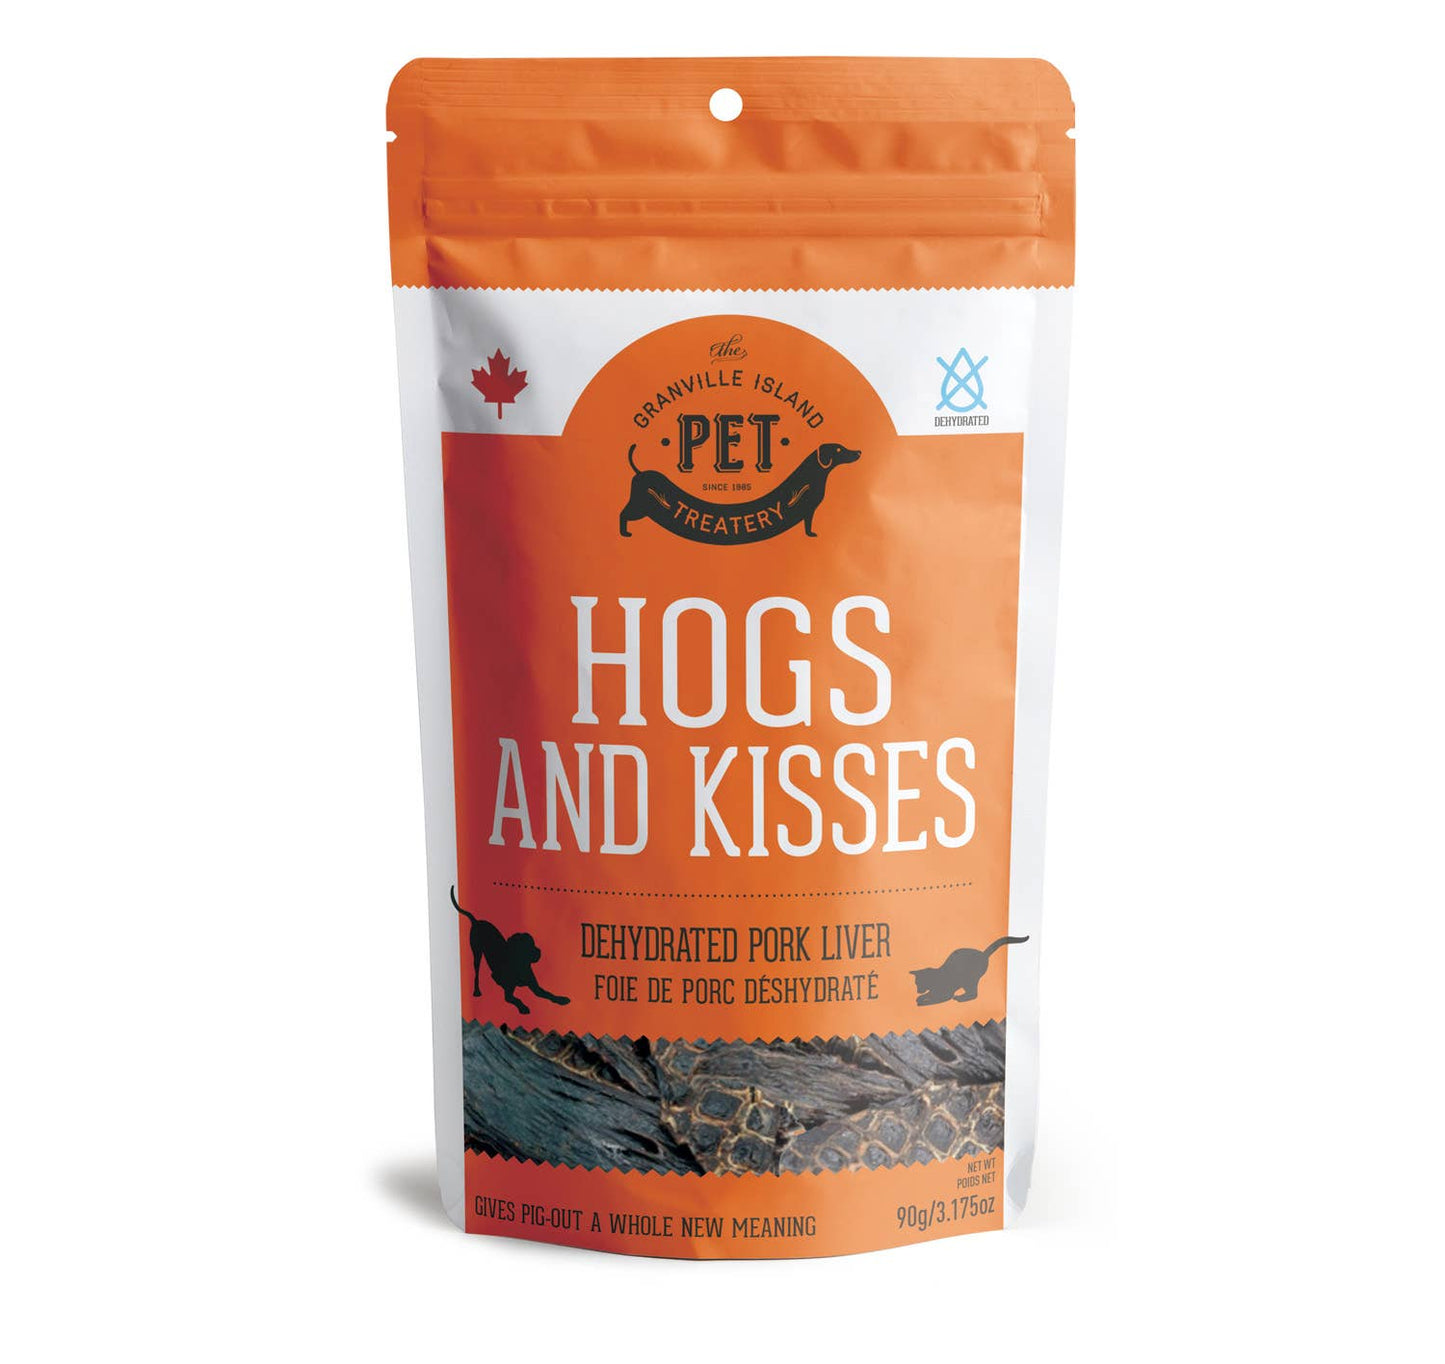 Hogs and Kisses Dehydrated Pork Liver Dog Treat